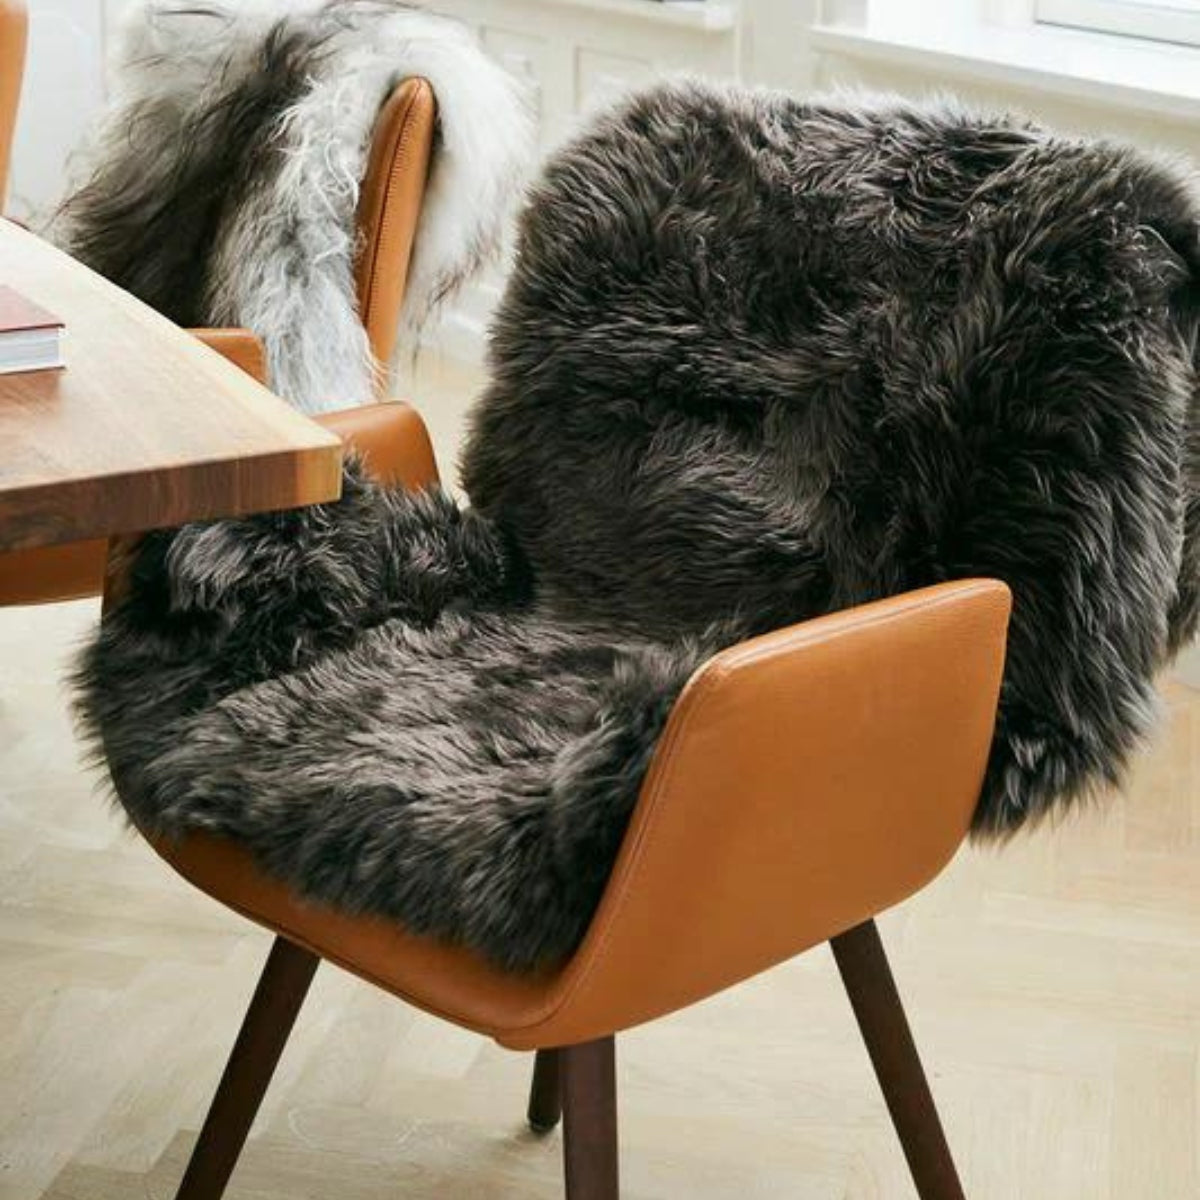 Natures Collection | Sheepskin – Long wool